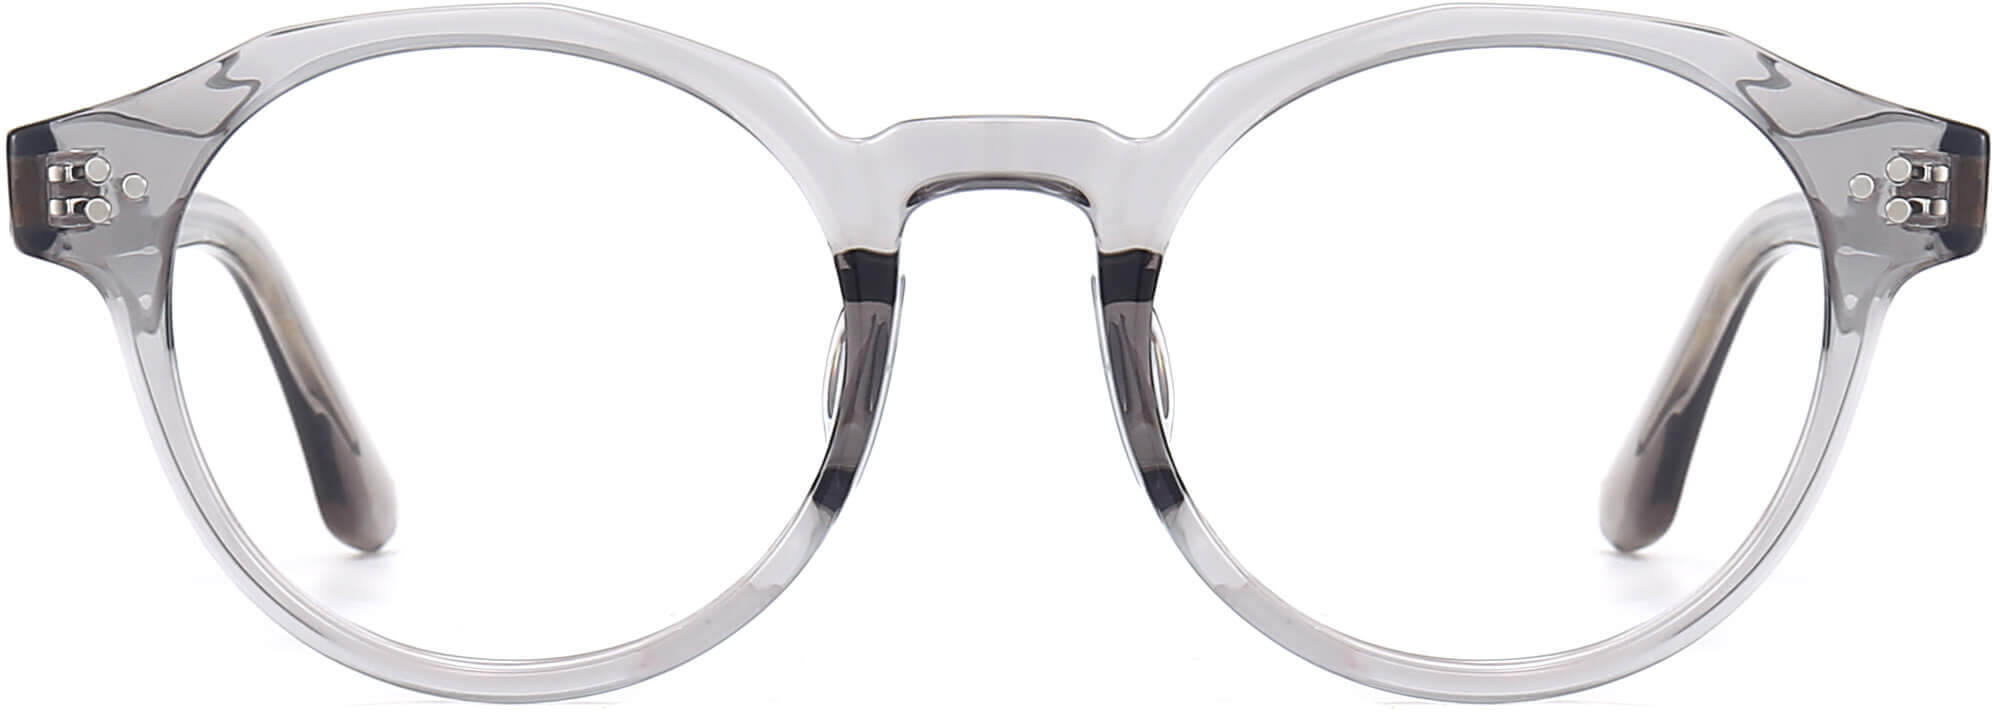 Cayden Round Gray Eyeglasses from ANRRI, front view